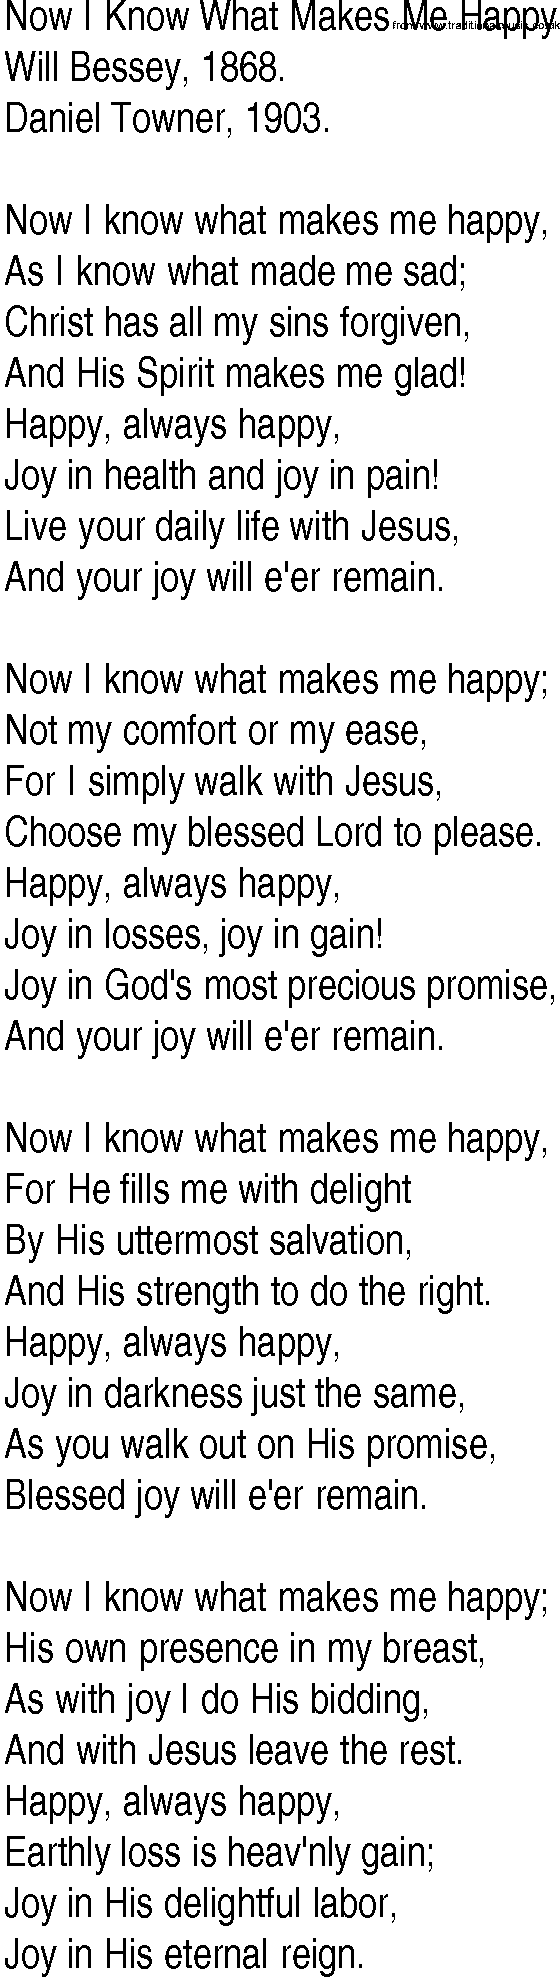 Hymn and Gospel Song: Now I Know What Makes Me Happy by Will Bessey lyrics